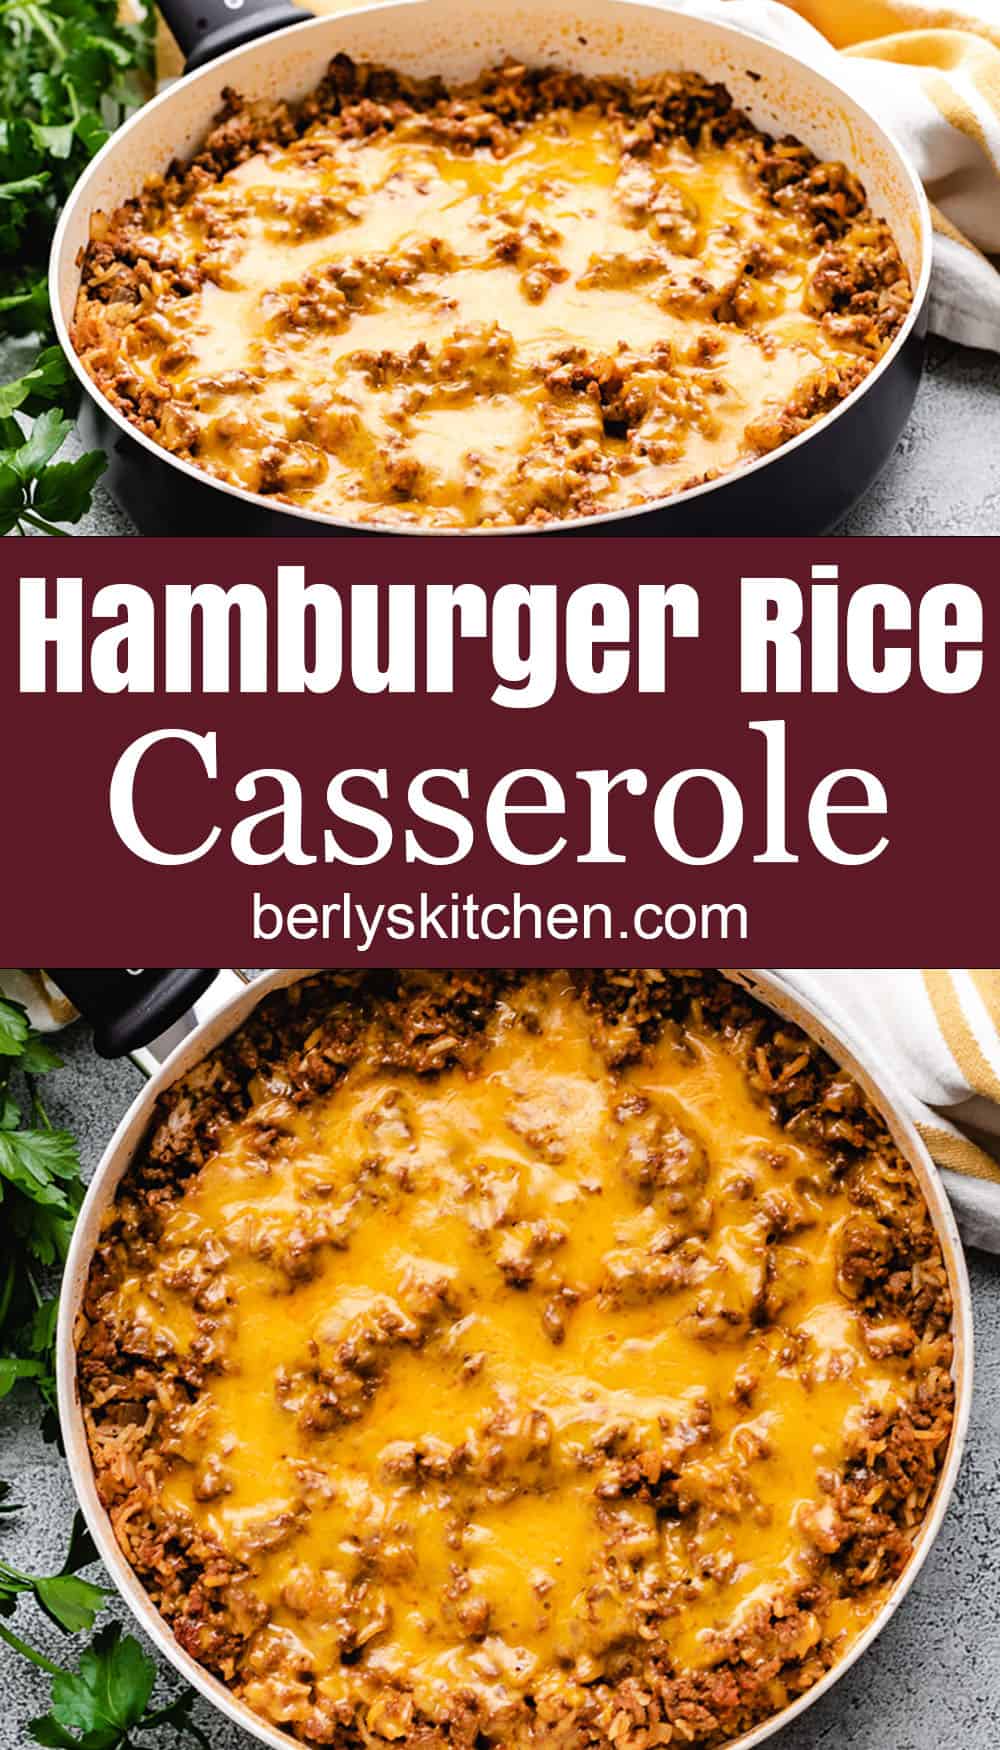 The Best Cheesy Beef and Rice Casserole - Womack Deabinder